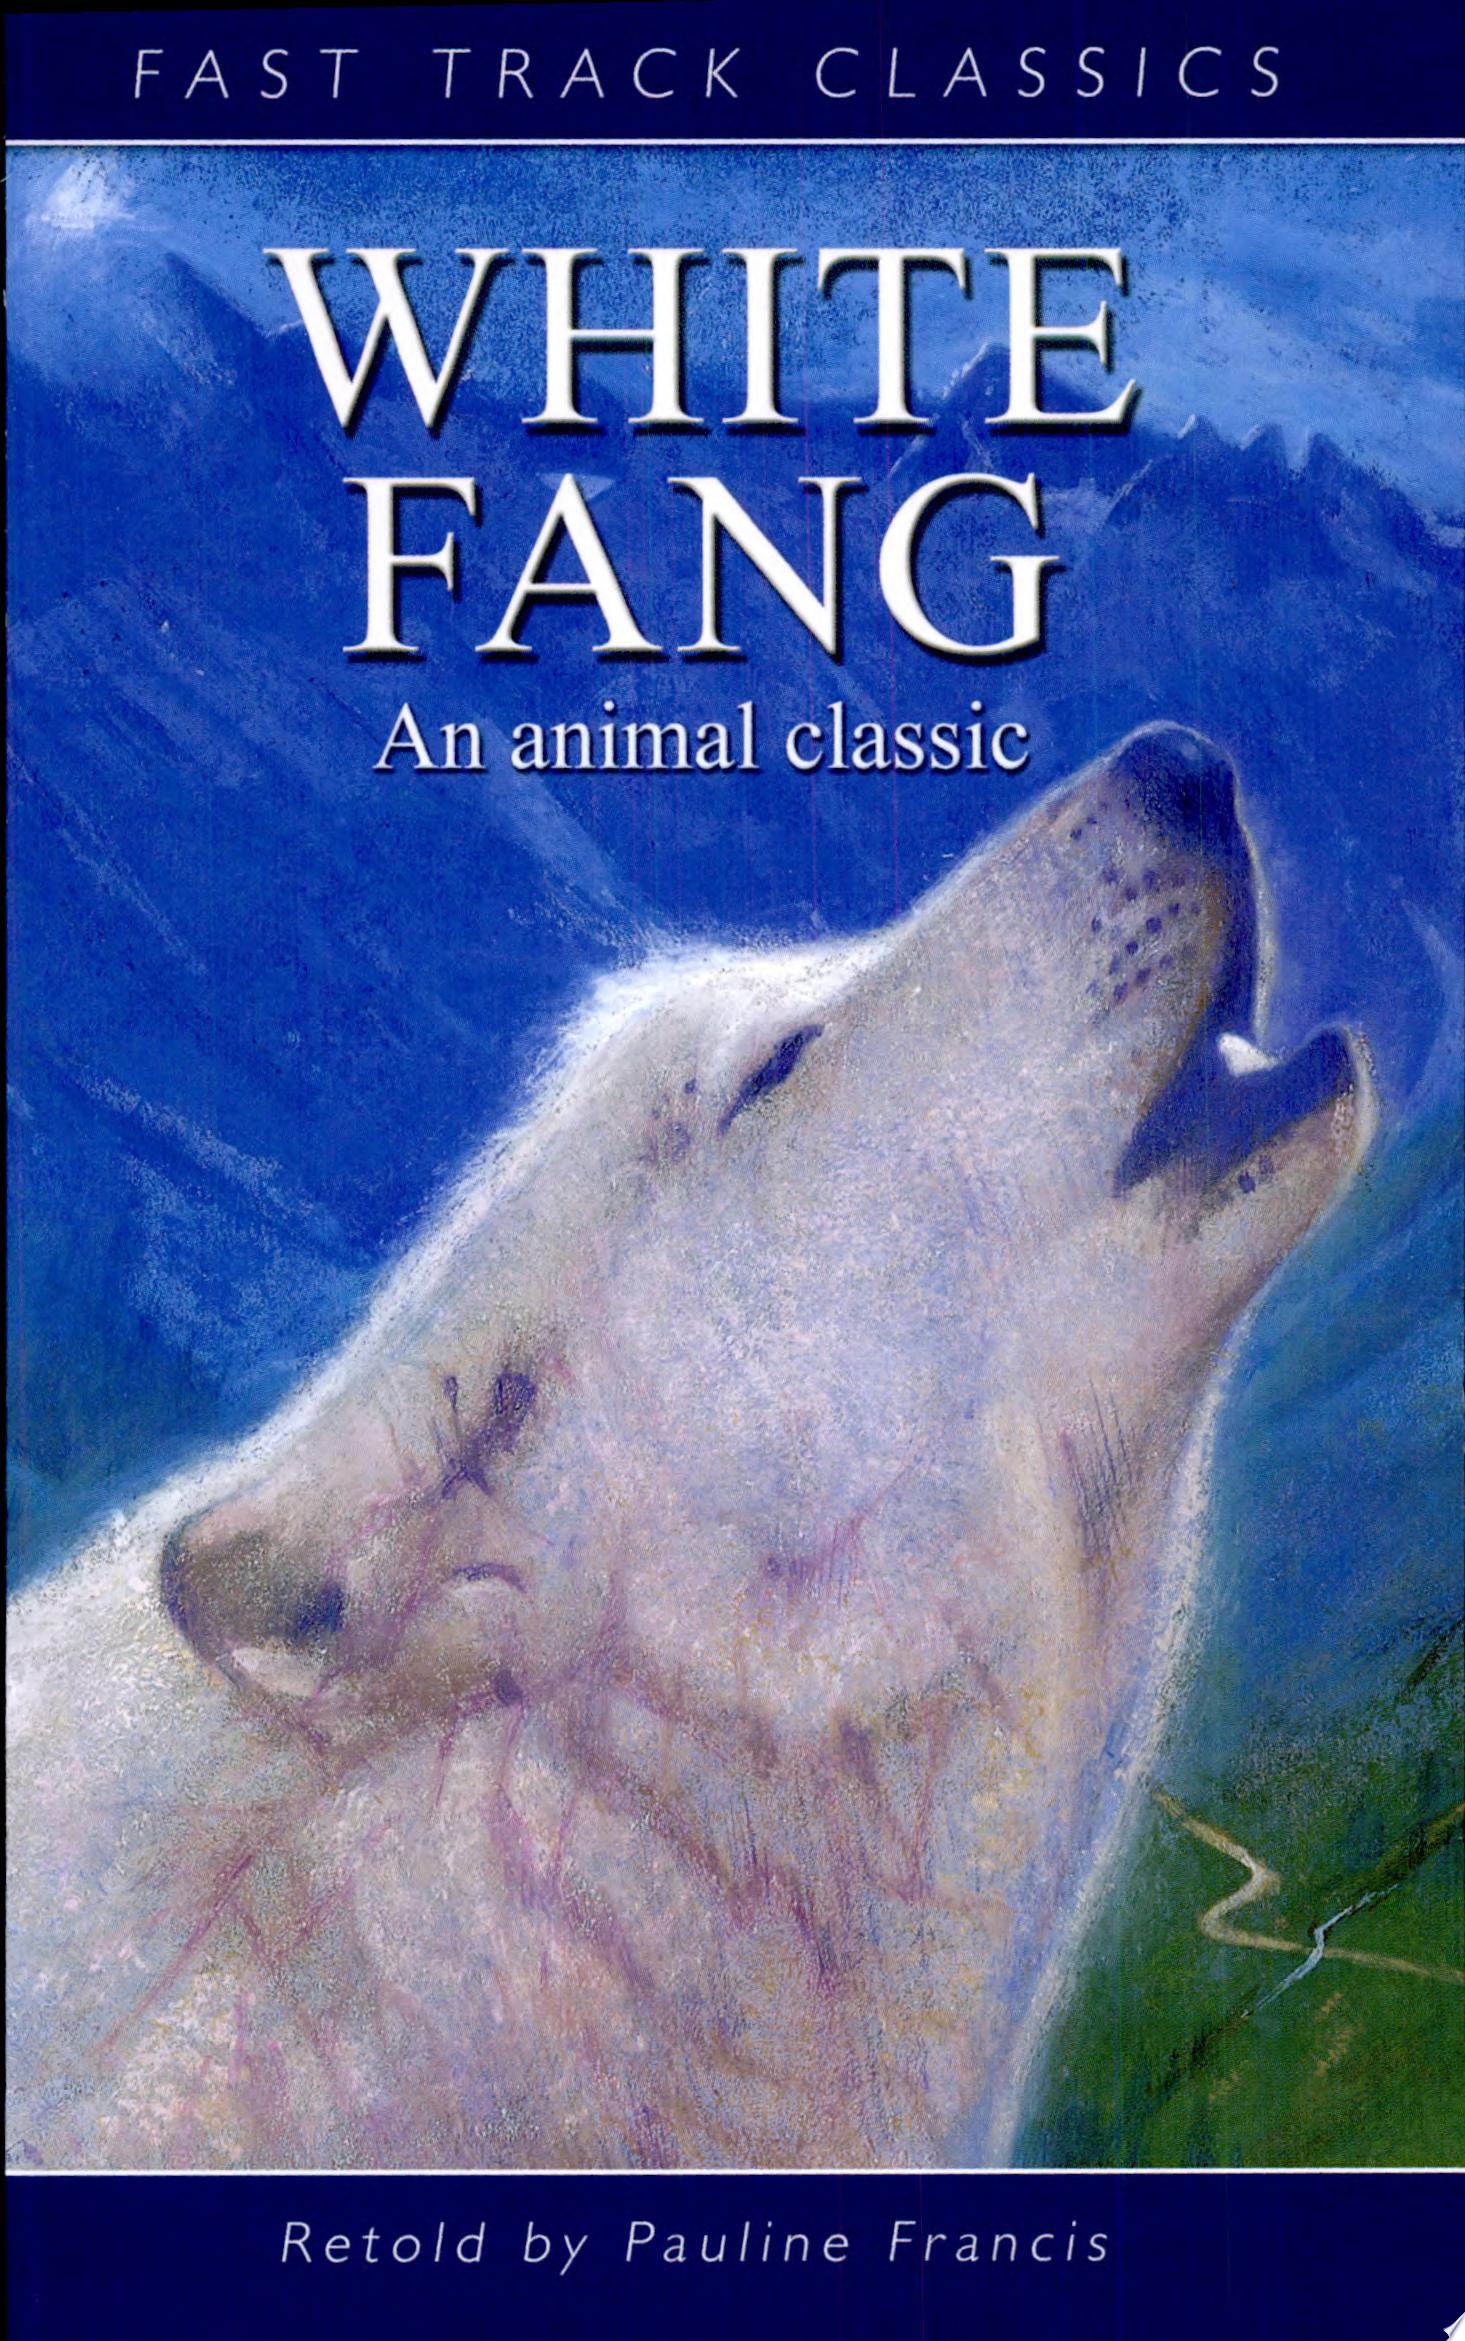 Image for "White Fang"